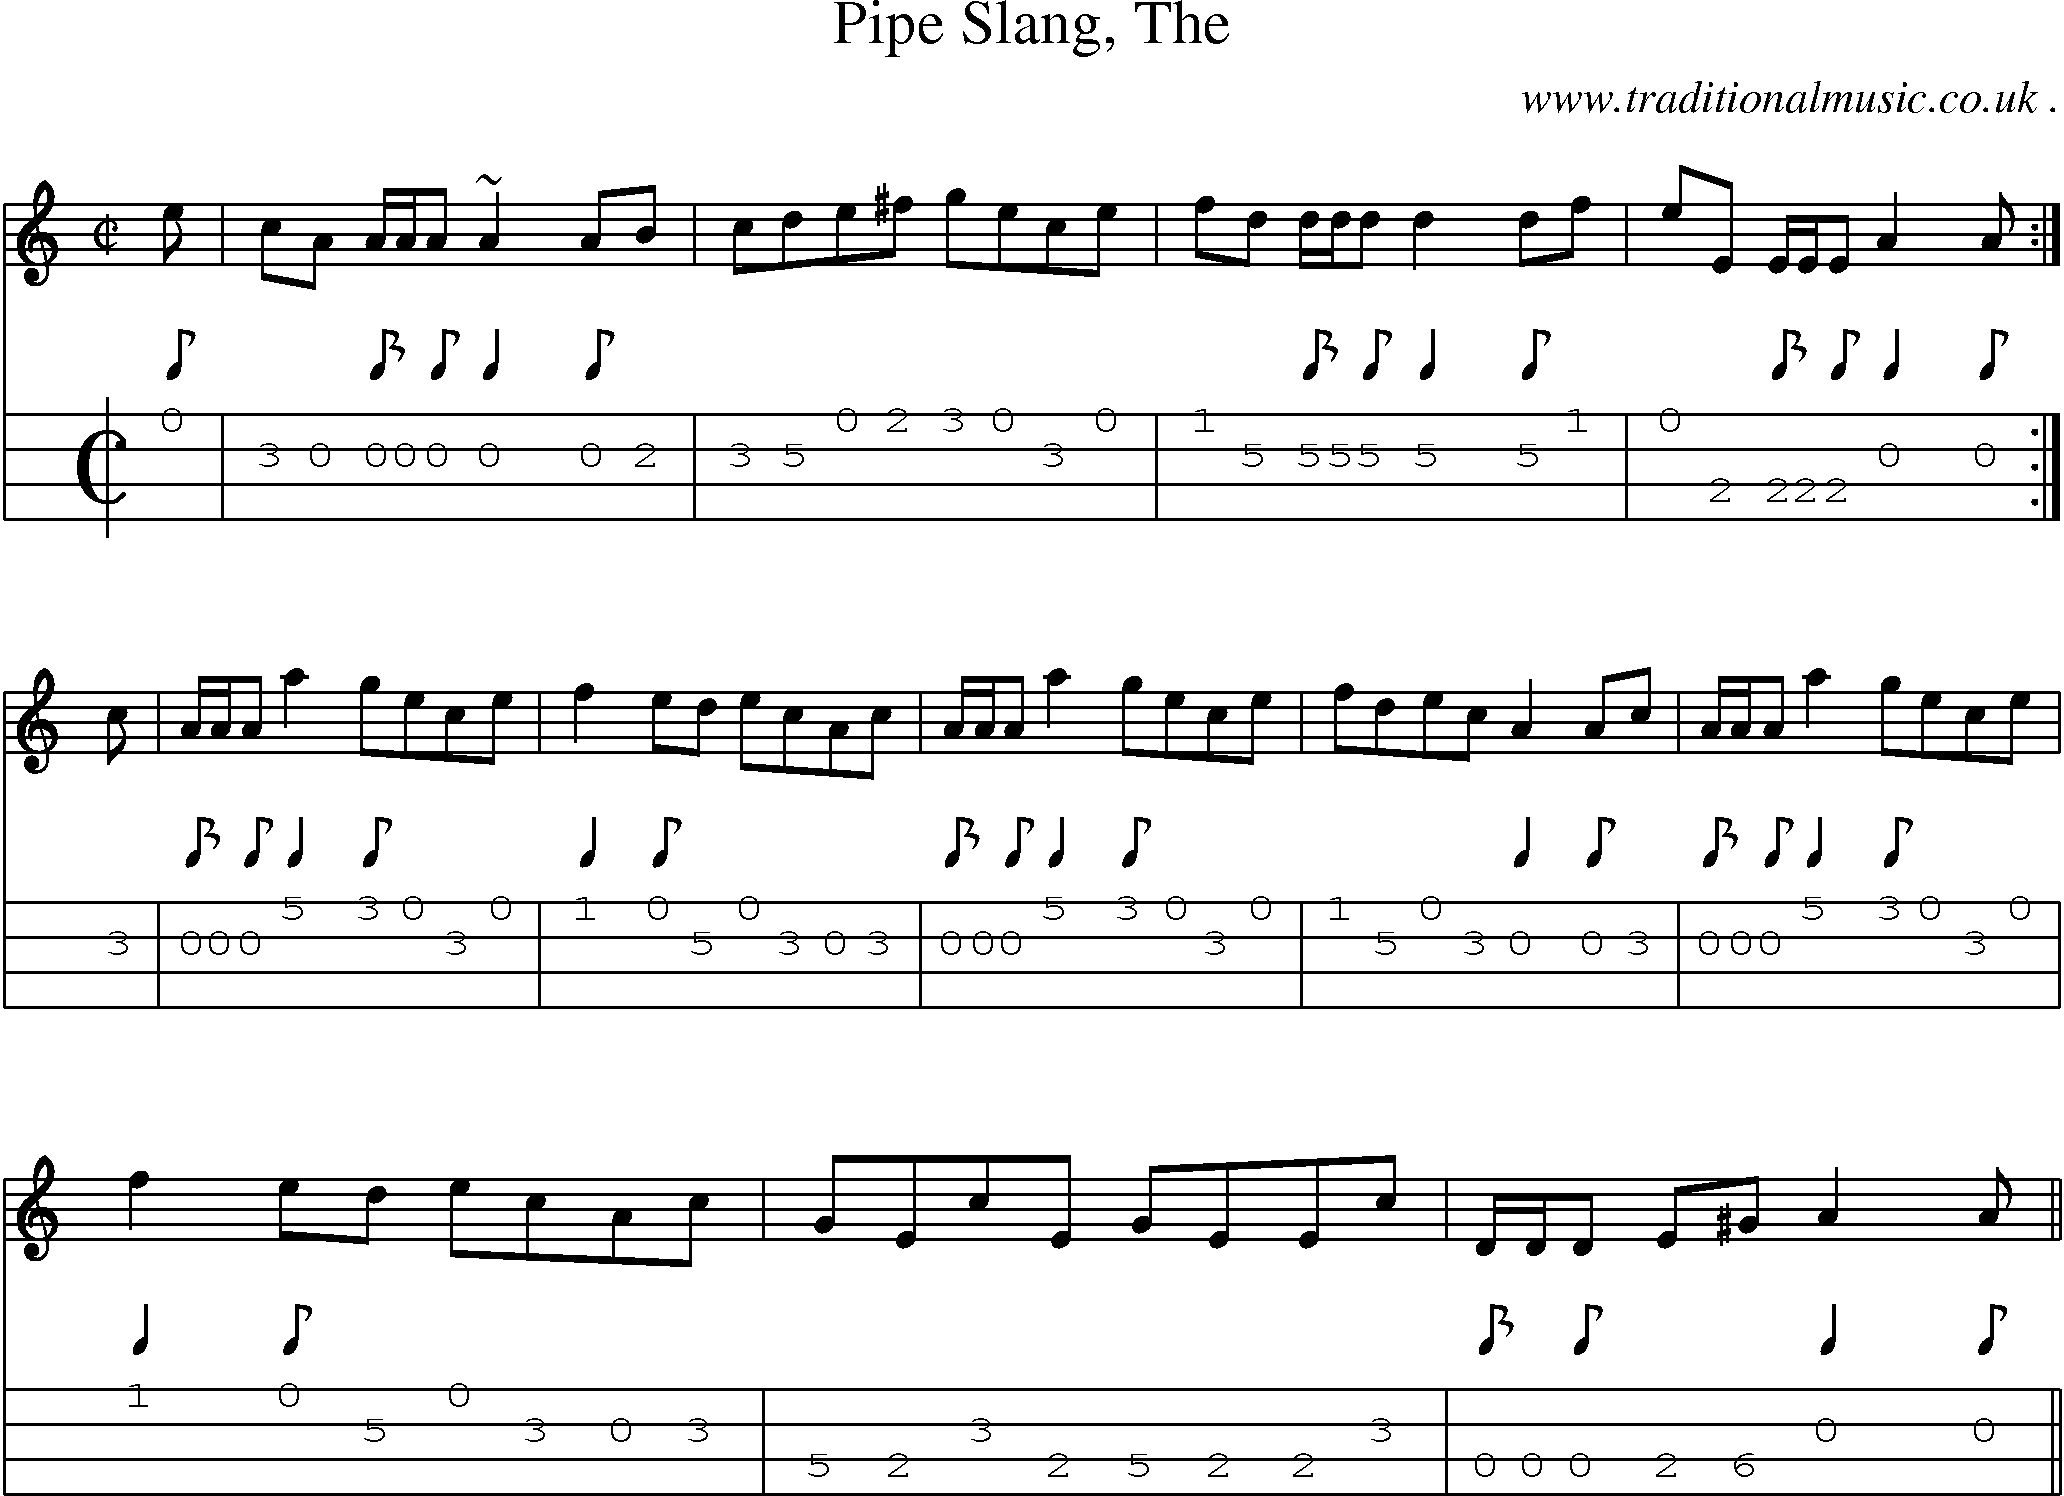 Sheet-music  score, Chords and Mandolin Tabs for Pipe Slang The